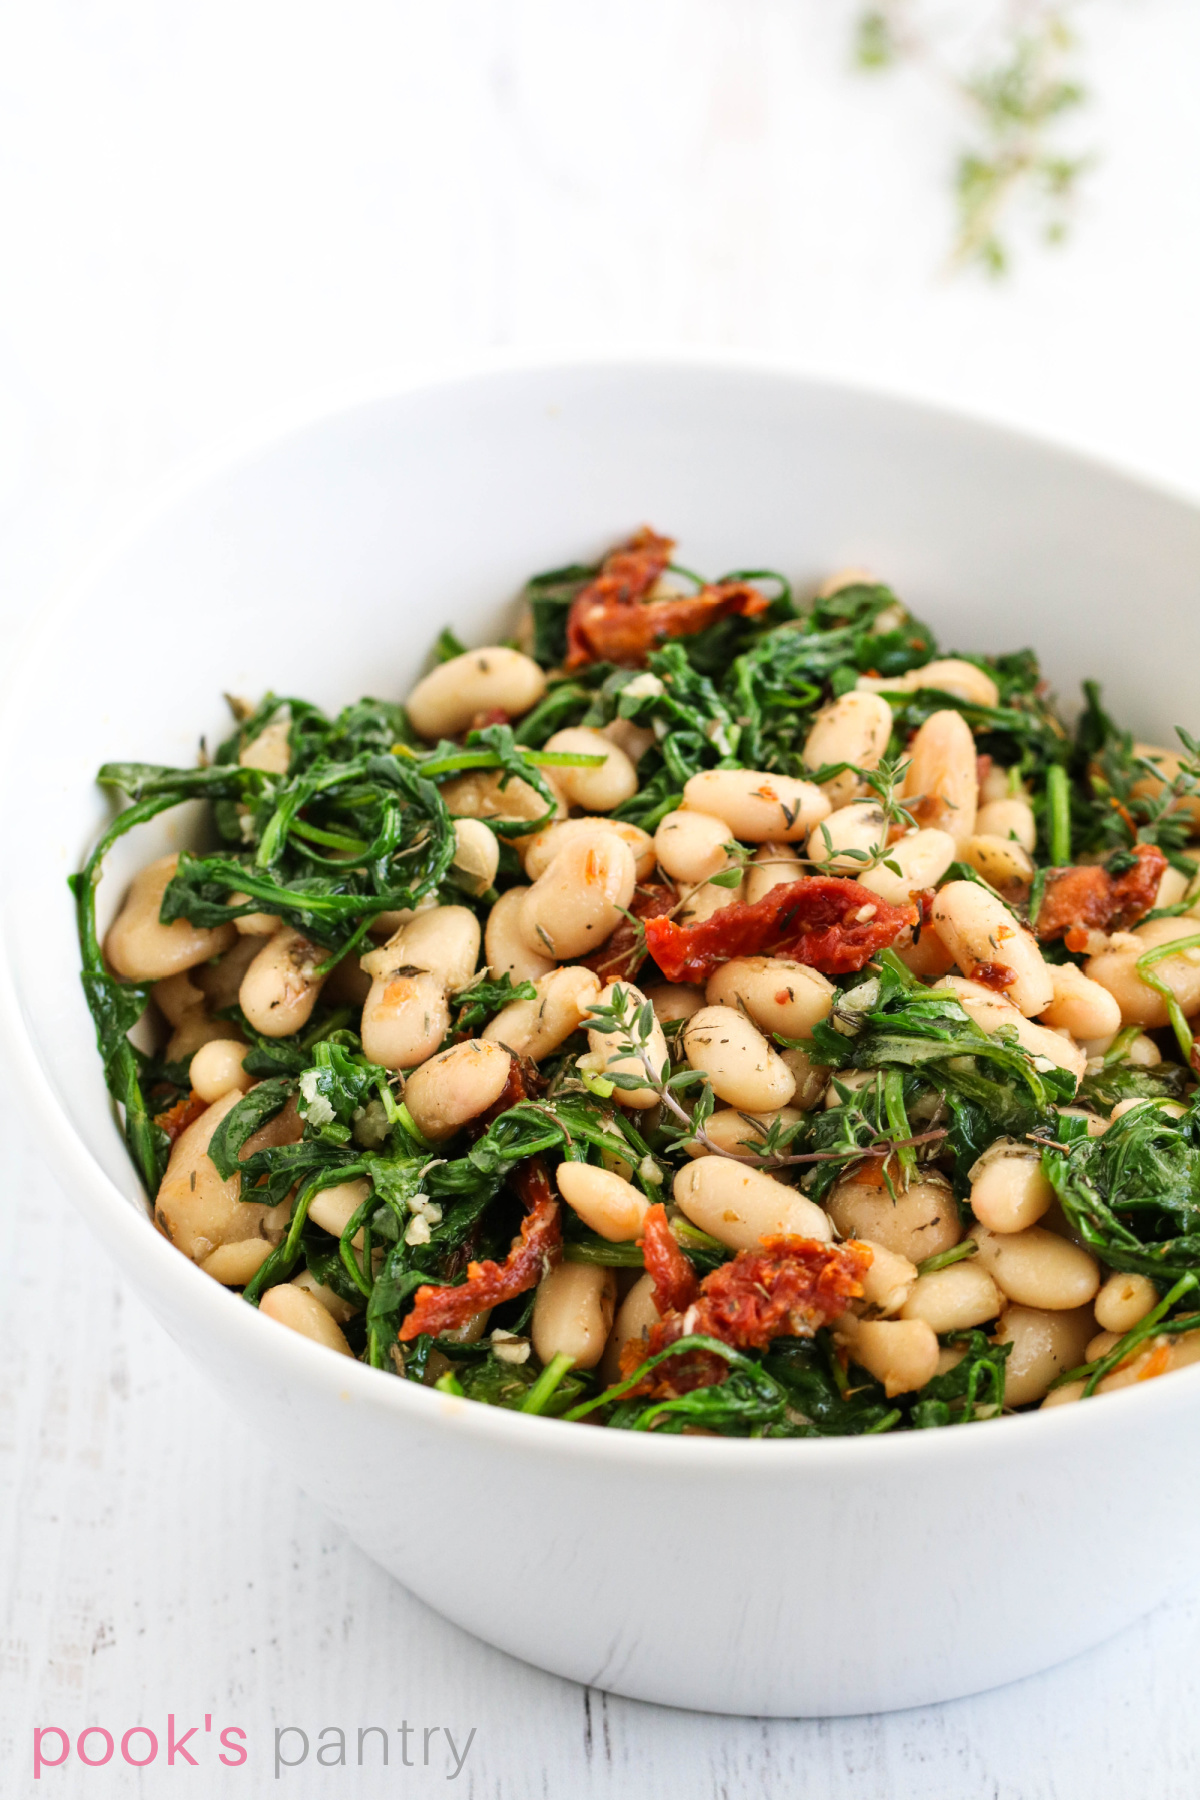 White beans and arugula with tomato